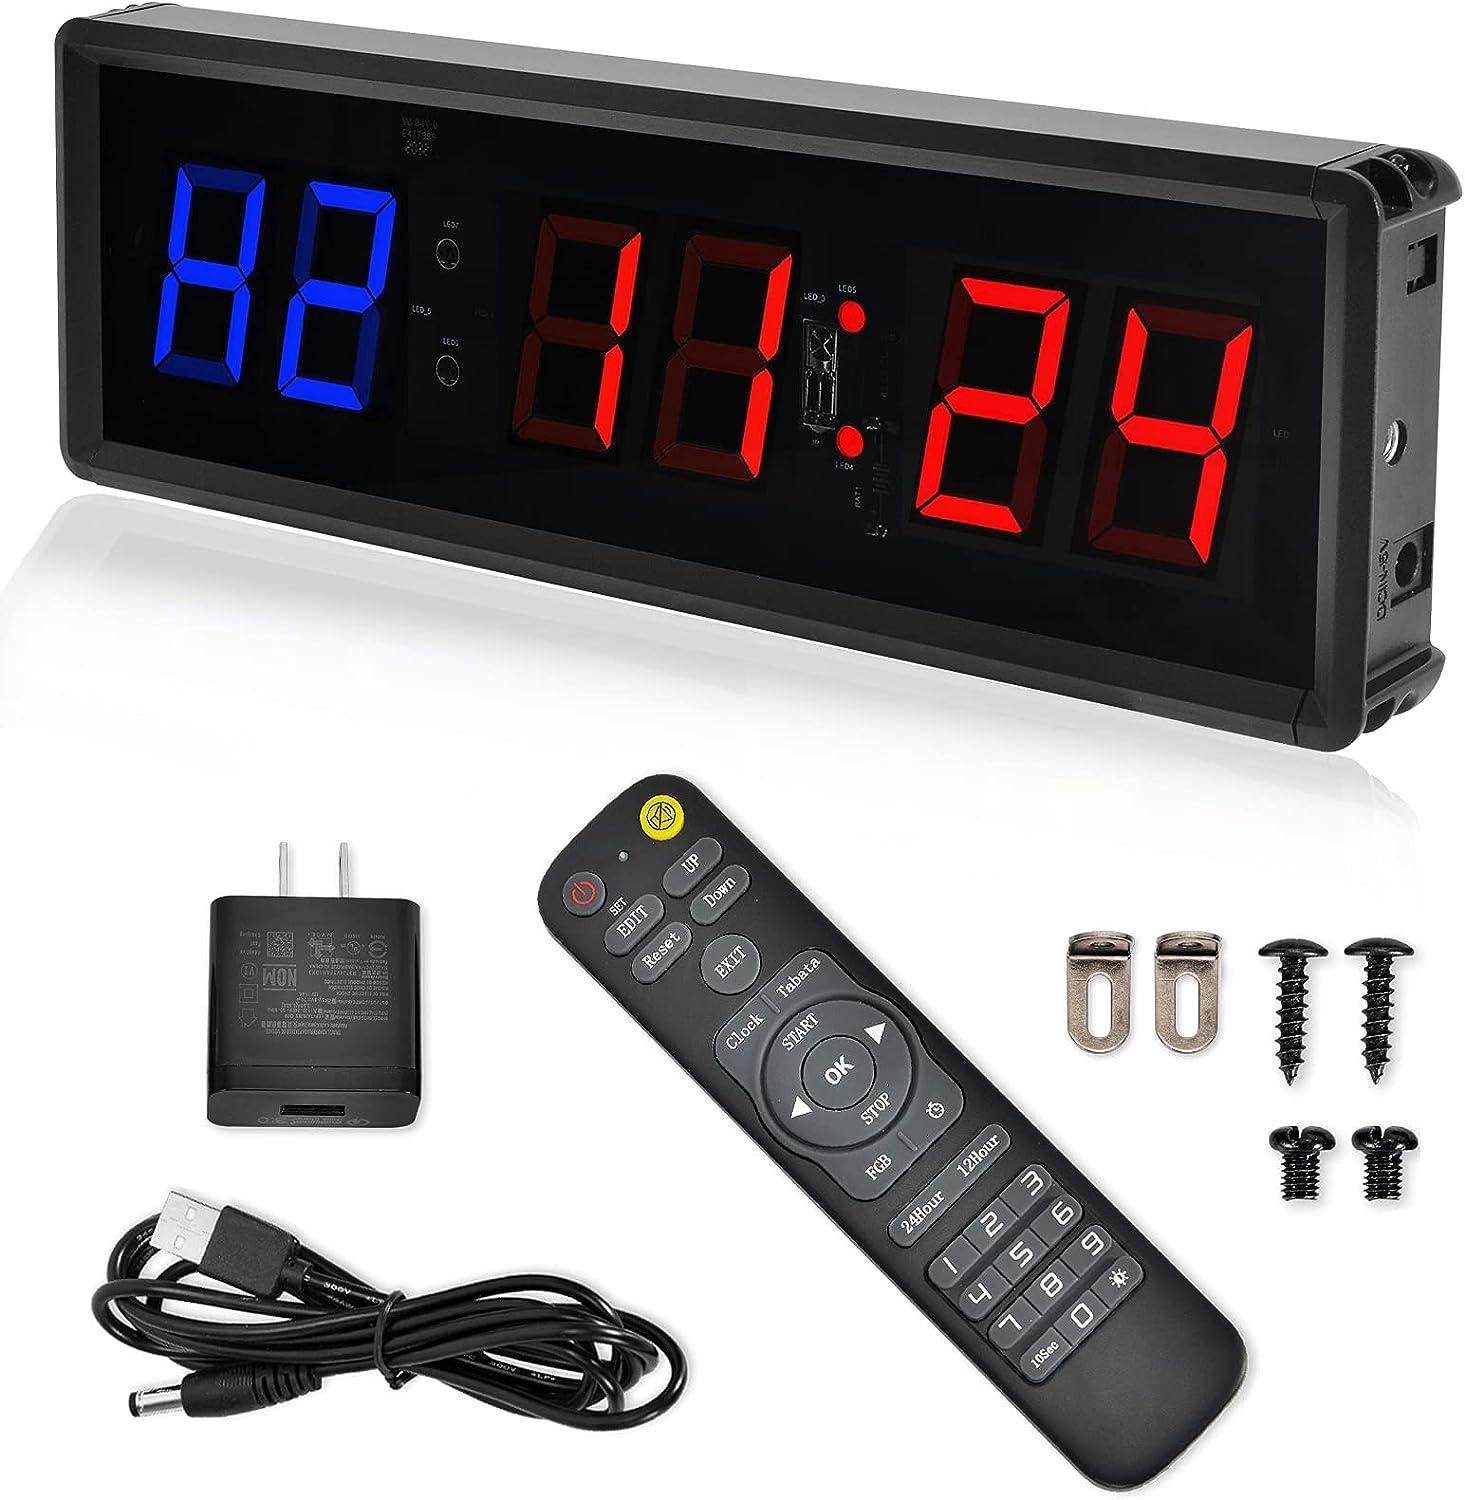 3 Countdown Clock Led Digital Wall Clock Game Timer With Stopwach Functions